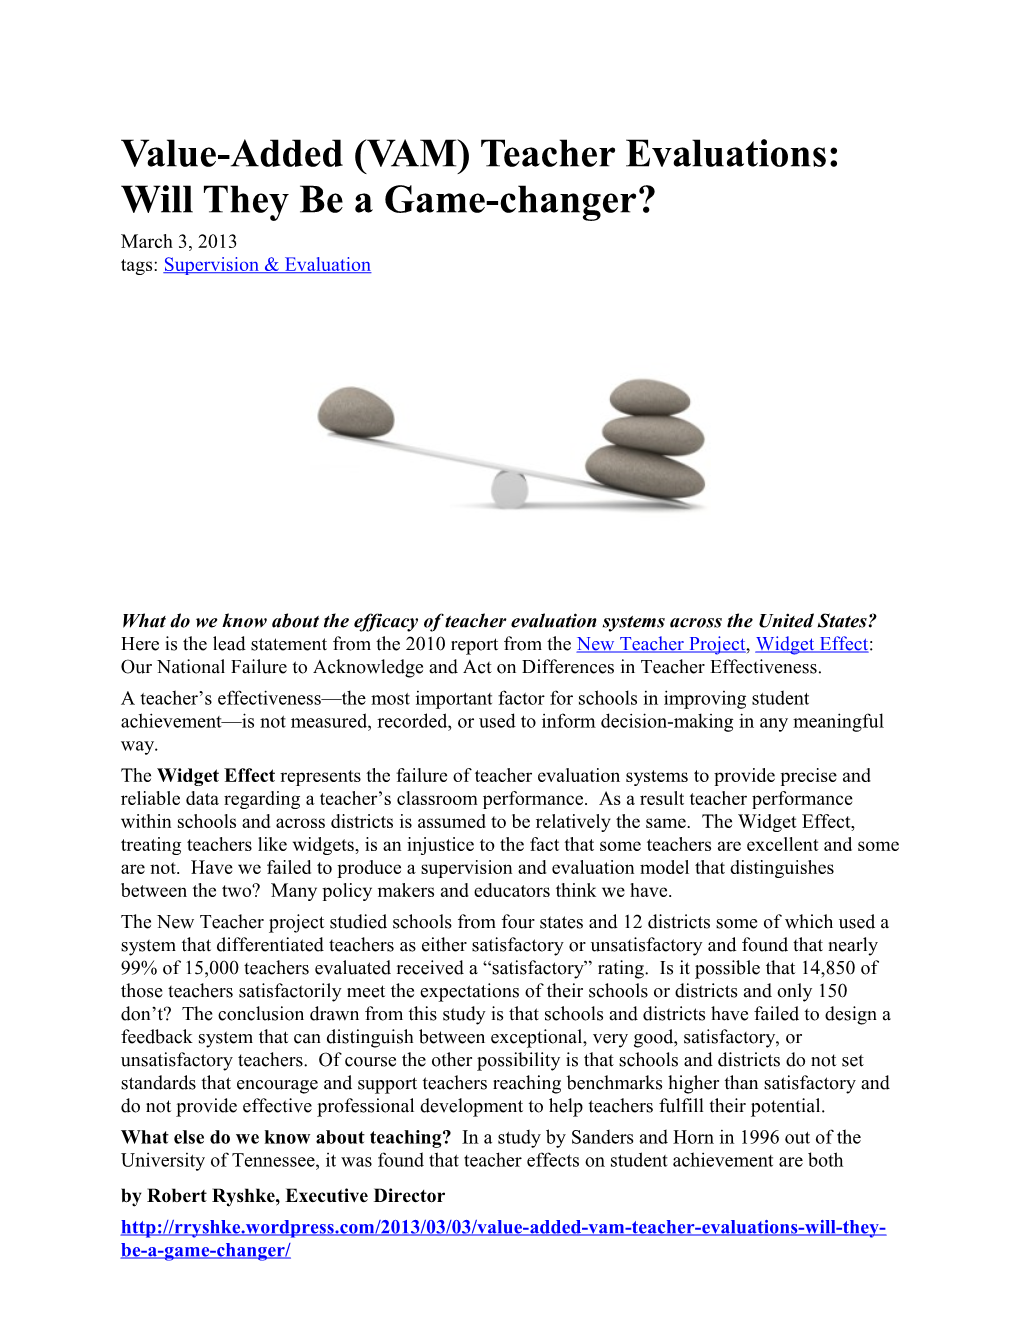 Value-Added (VAM) Teacher Evaluations: Will They Be Agame-Changer?